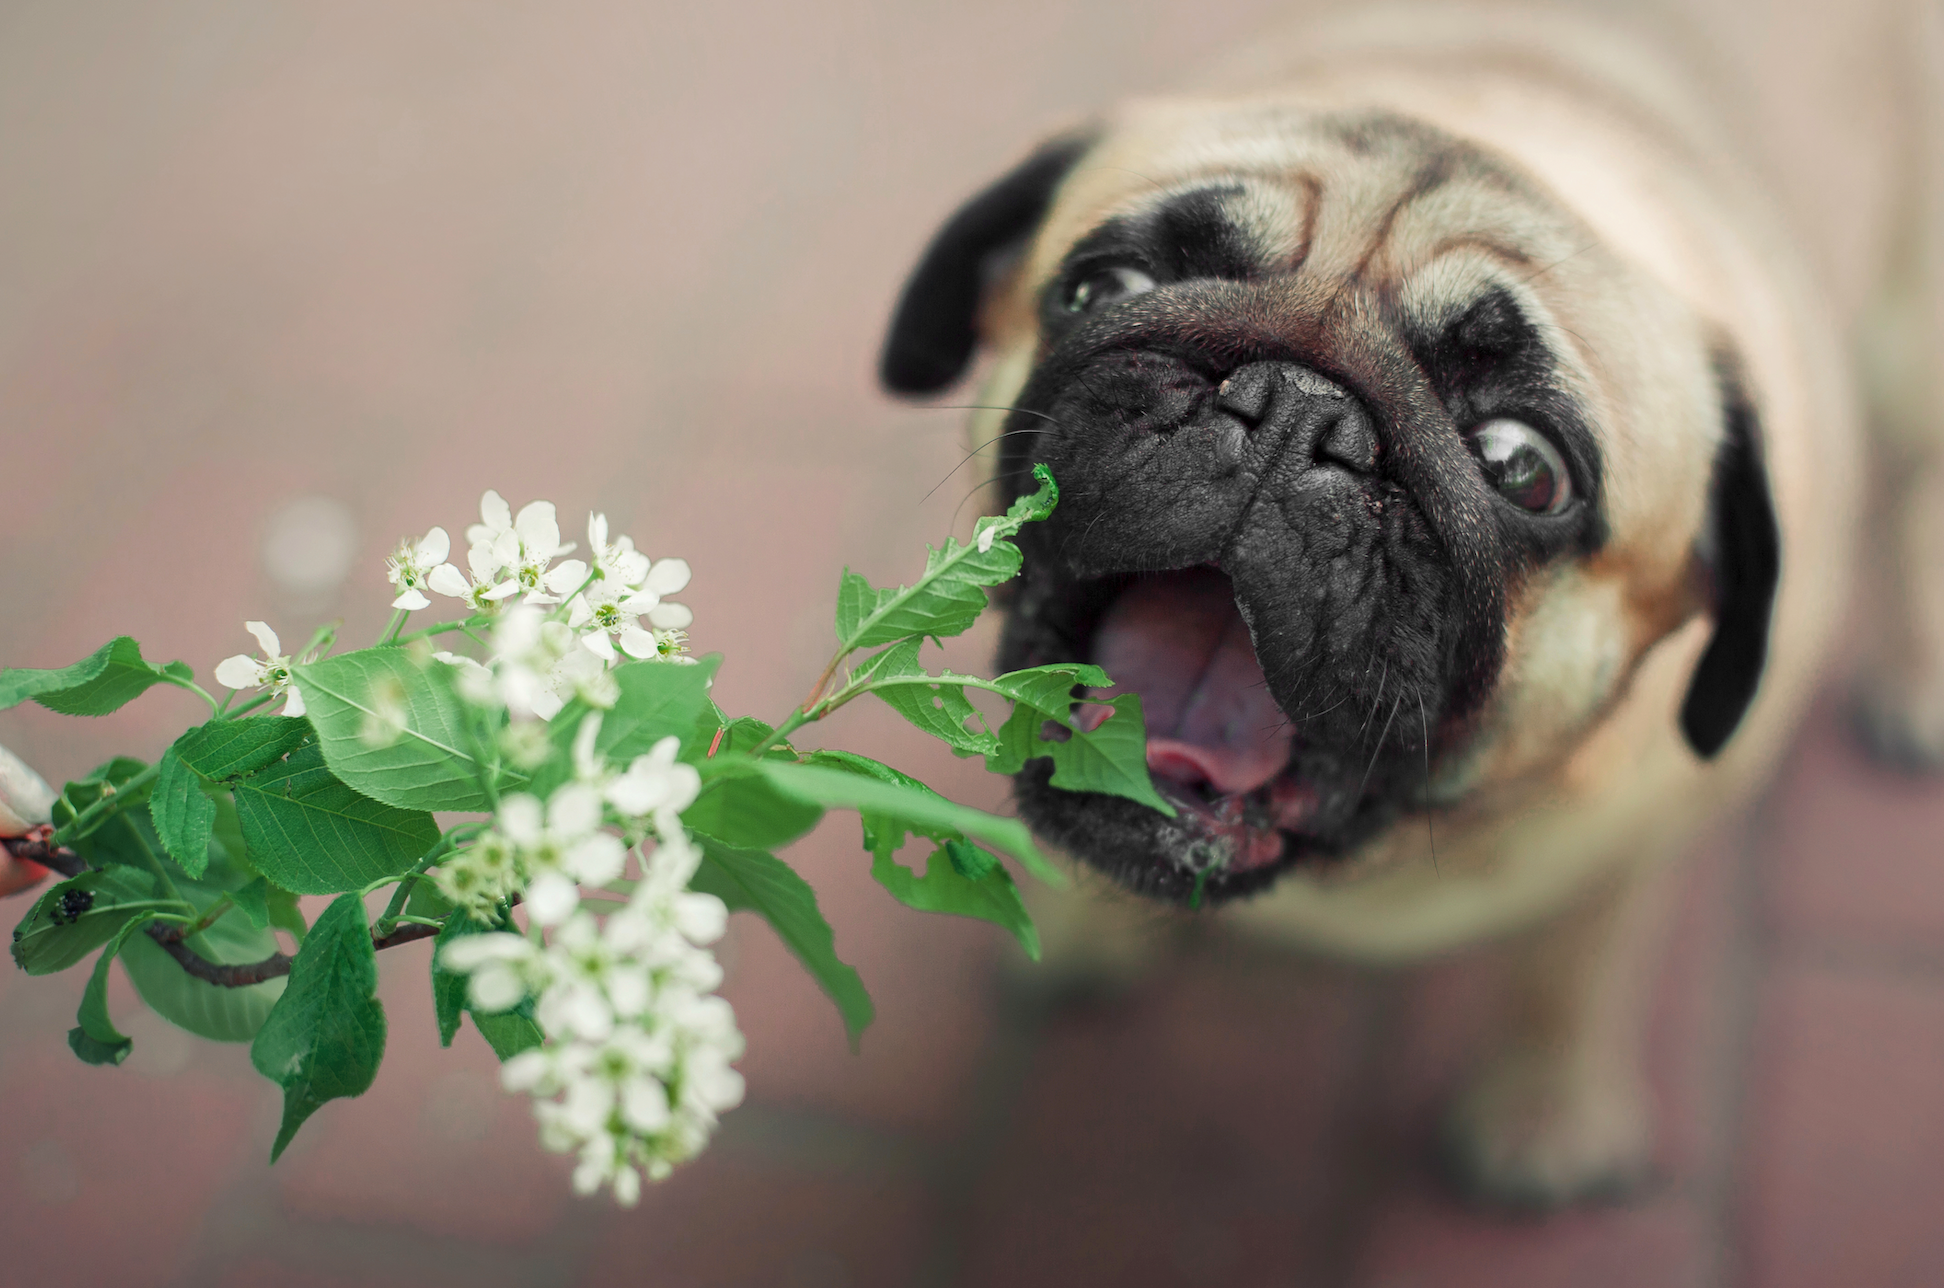 A pug dog with mouth open near a flower and plant.